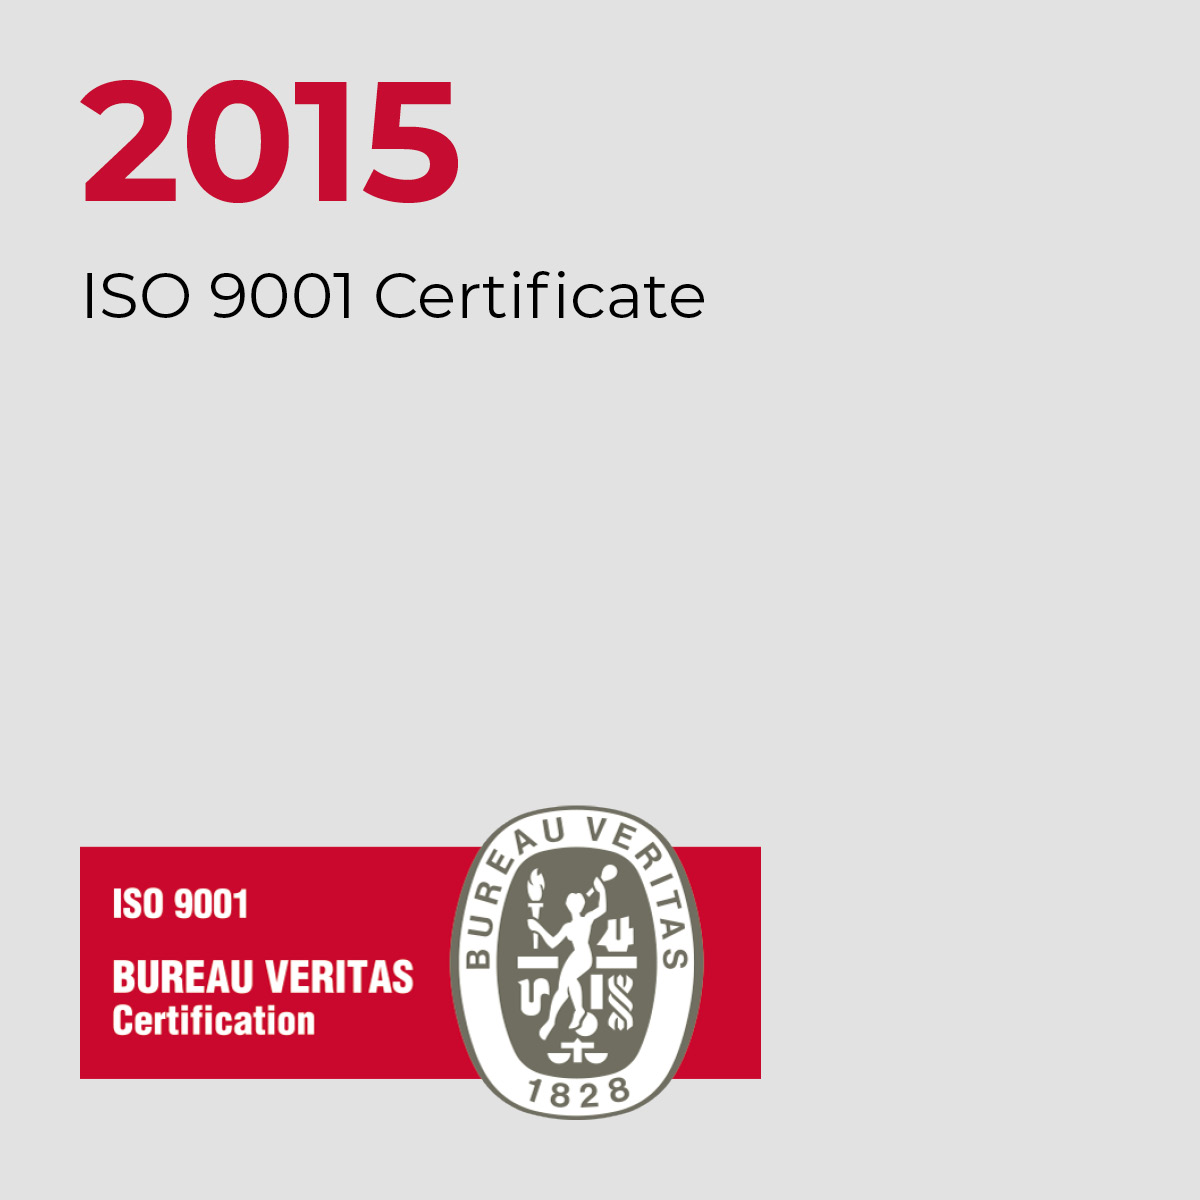 2015, ISO 9001 Certificate